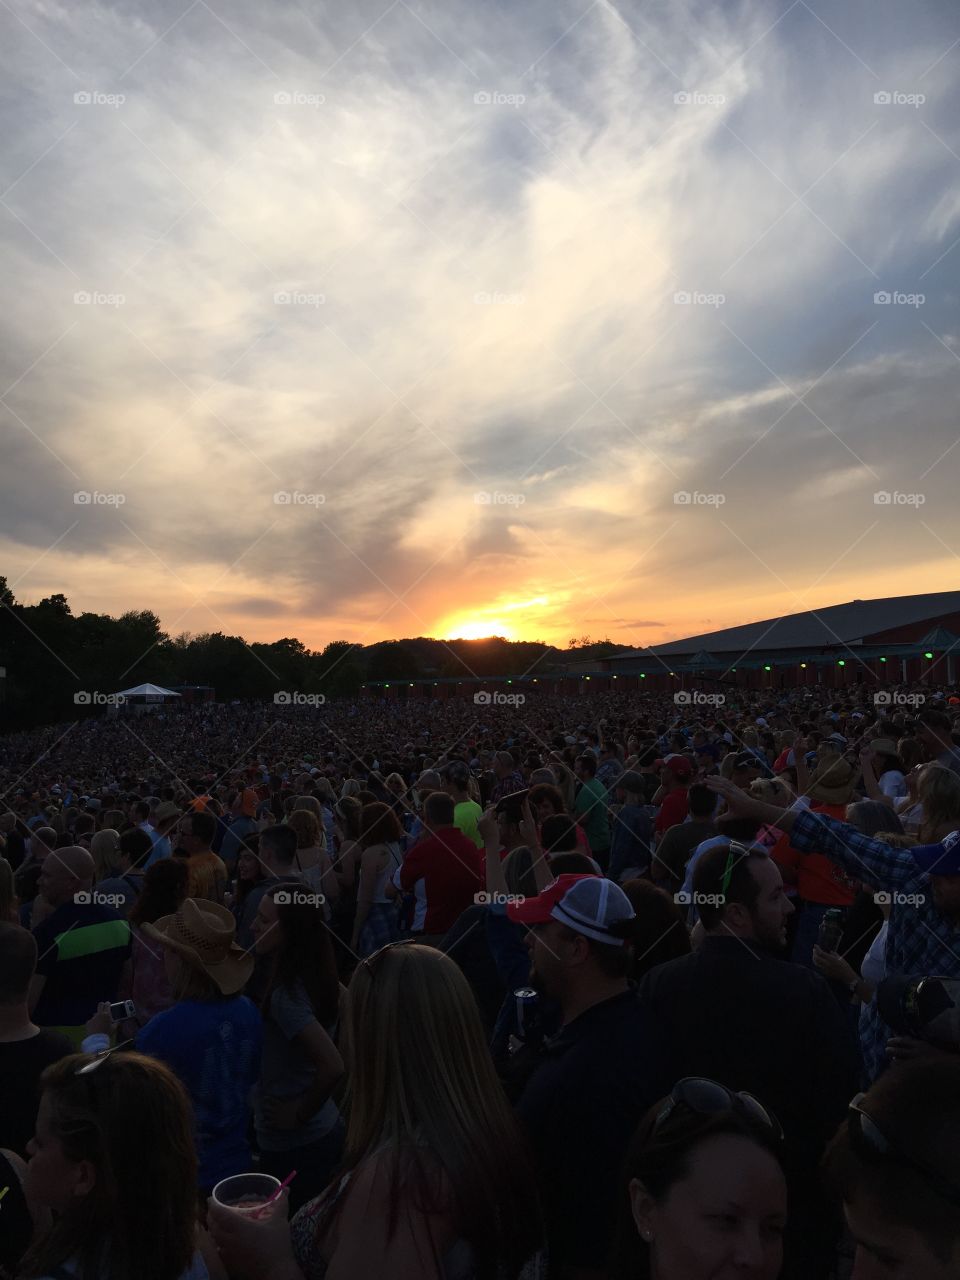 Music at Sunset. Enjoying some good music by The Zac Brown Band. It was a great turnout down at riverbend music center. 